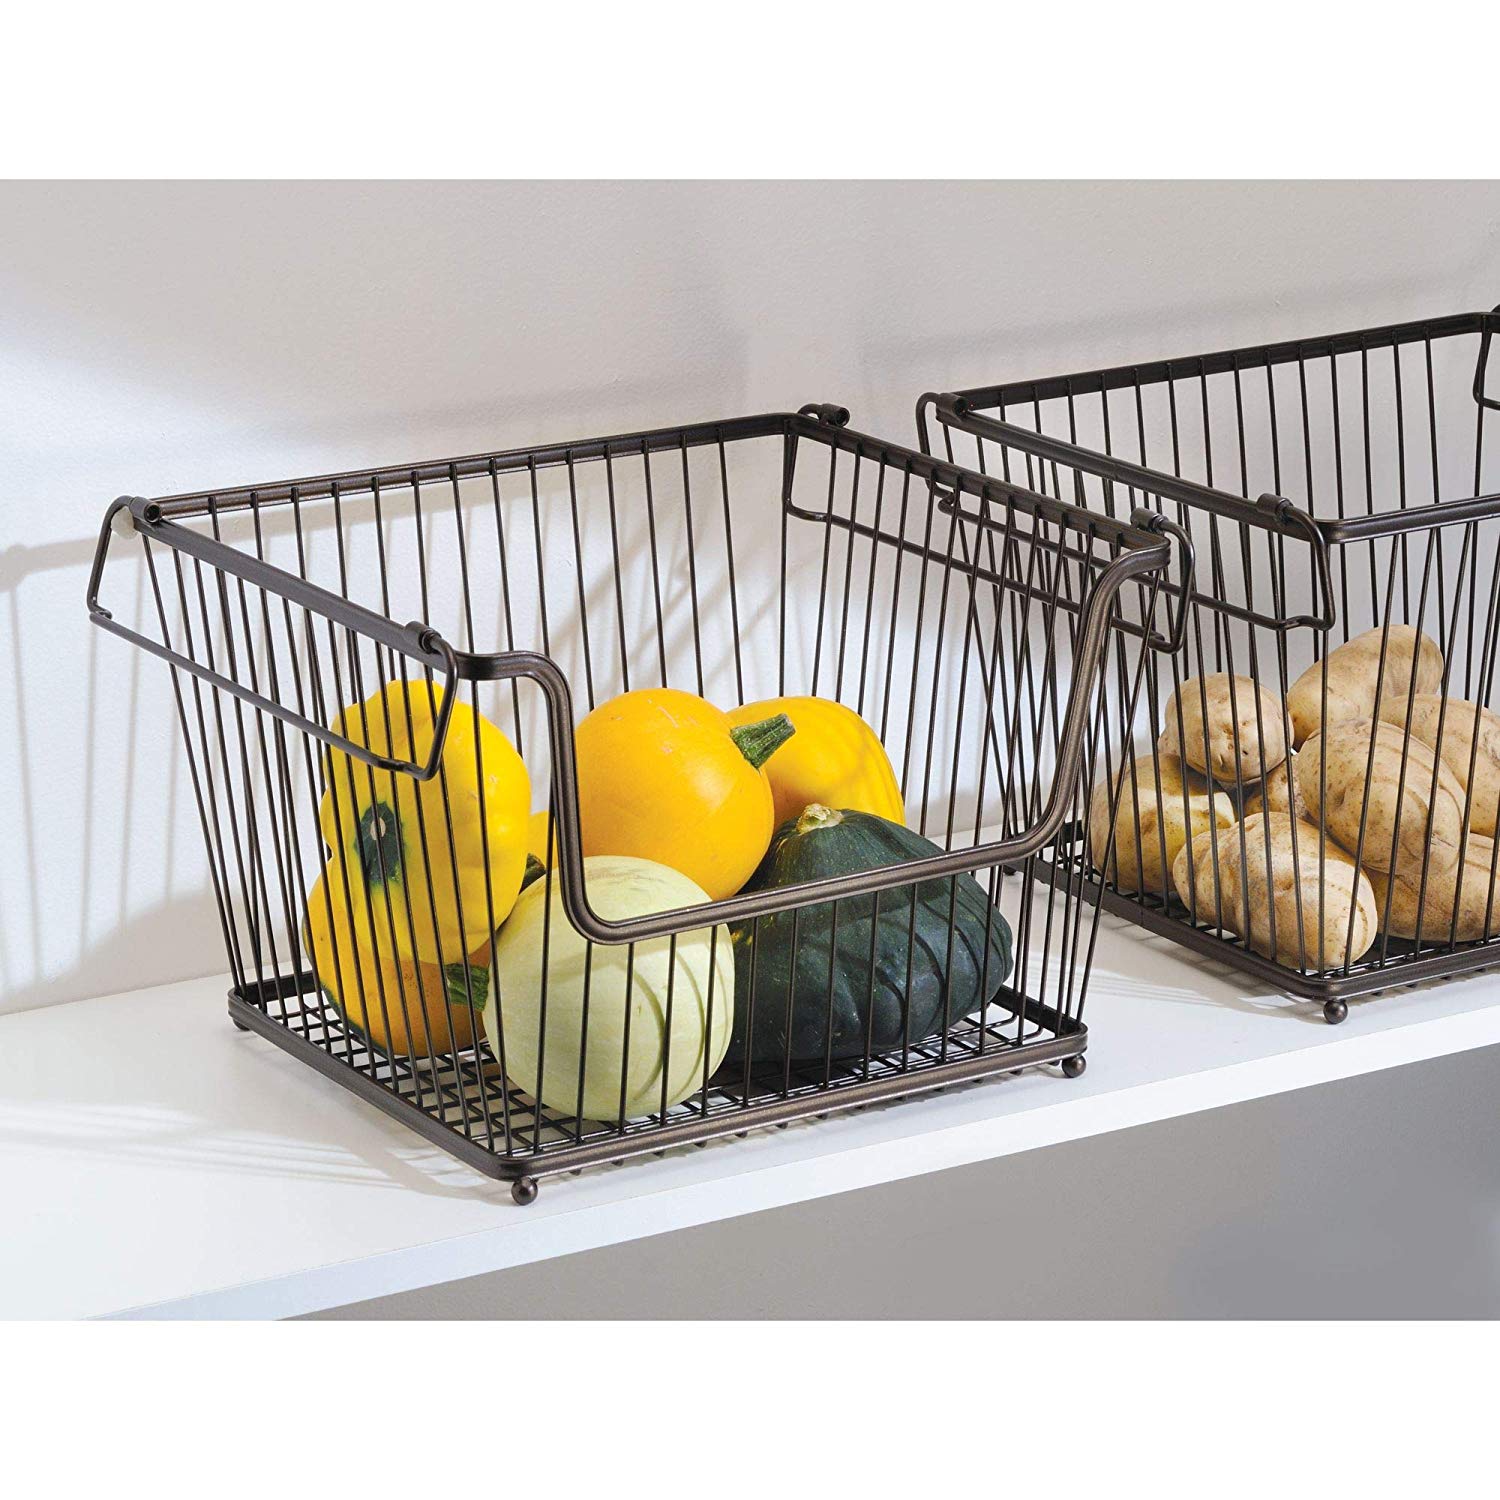 Pantry Black Countertop Warmfill 6 Pack Wire Baskets for Storage Durable Metal Basket Pantry Organizer Storage Bin Baskets for Kitchen Cabinets 2 Small, 2 Medium, 2 Large Wire Basket Closets 